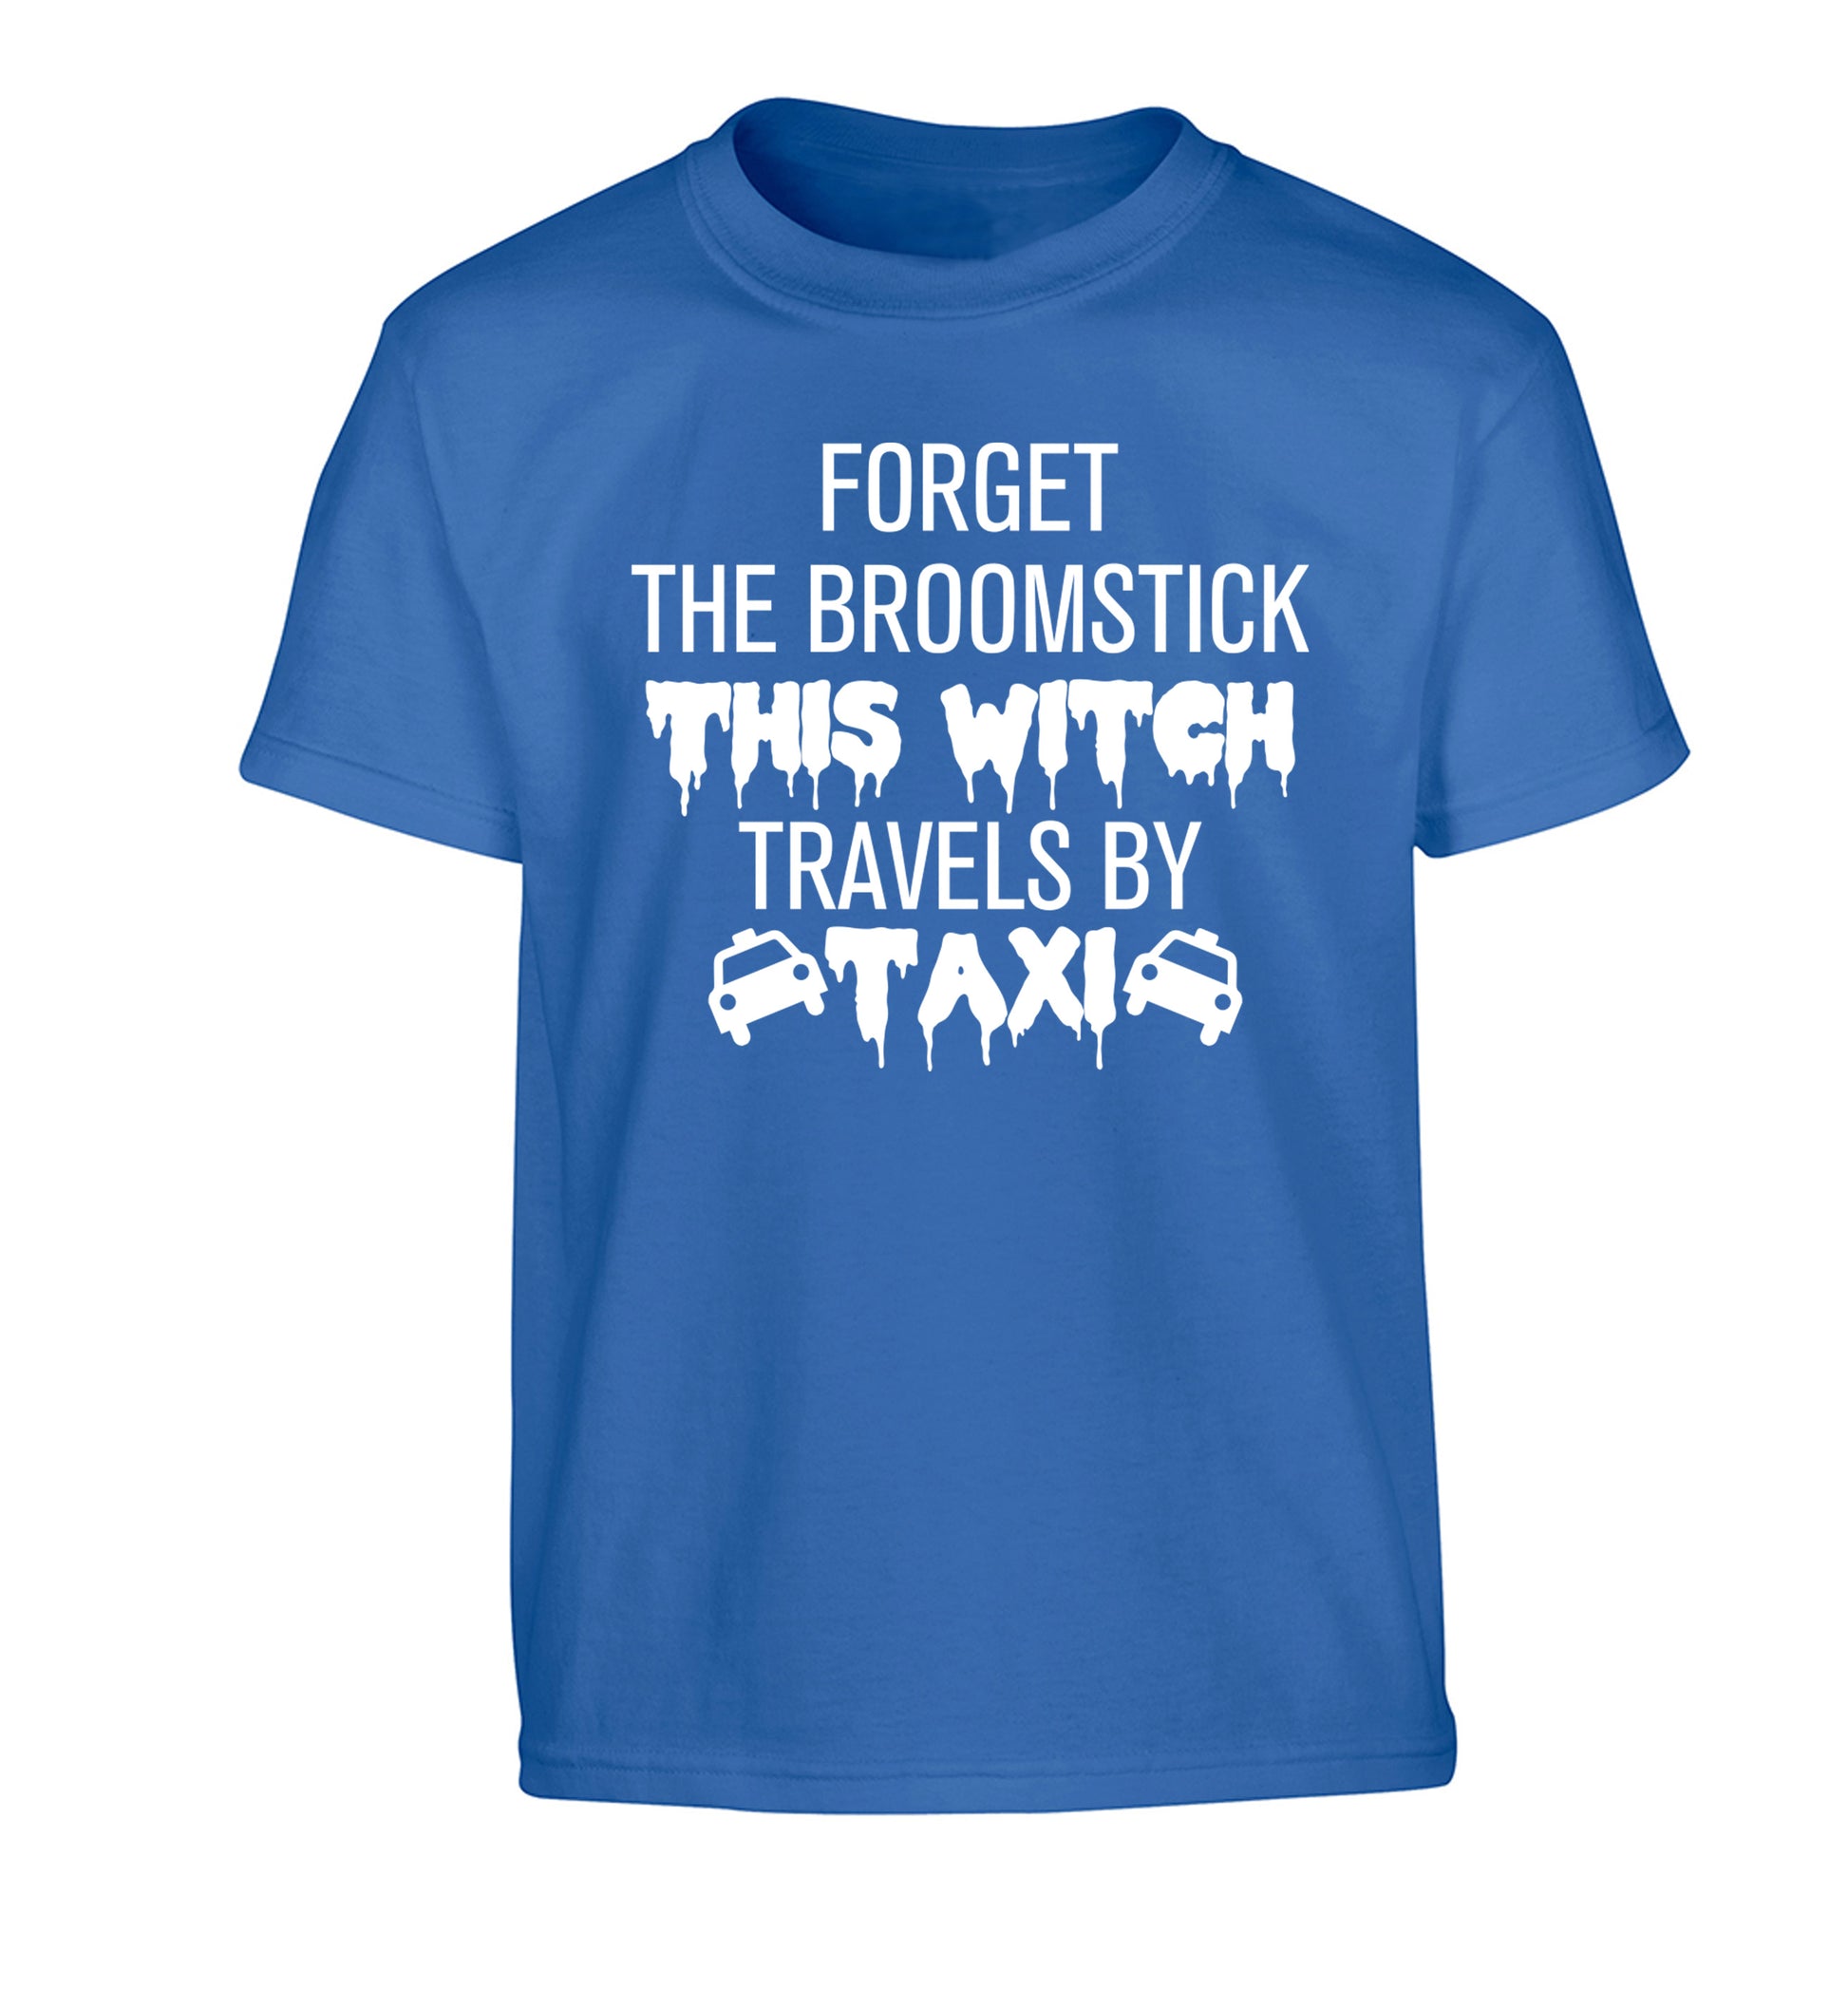 Forget the broomstick this witch travels by taxi Children's blue Tshirt 12-14 Years